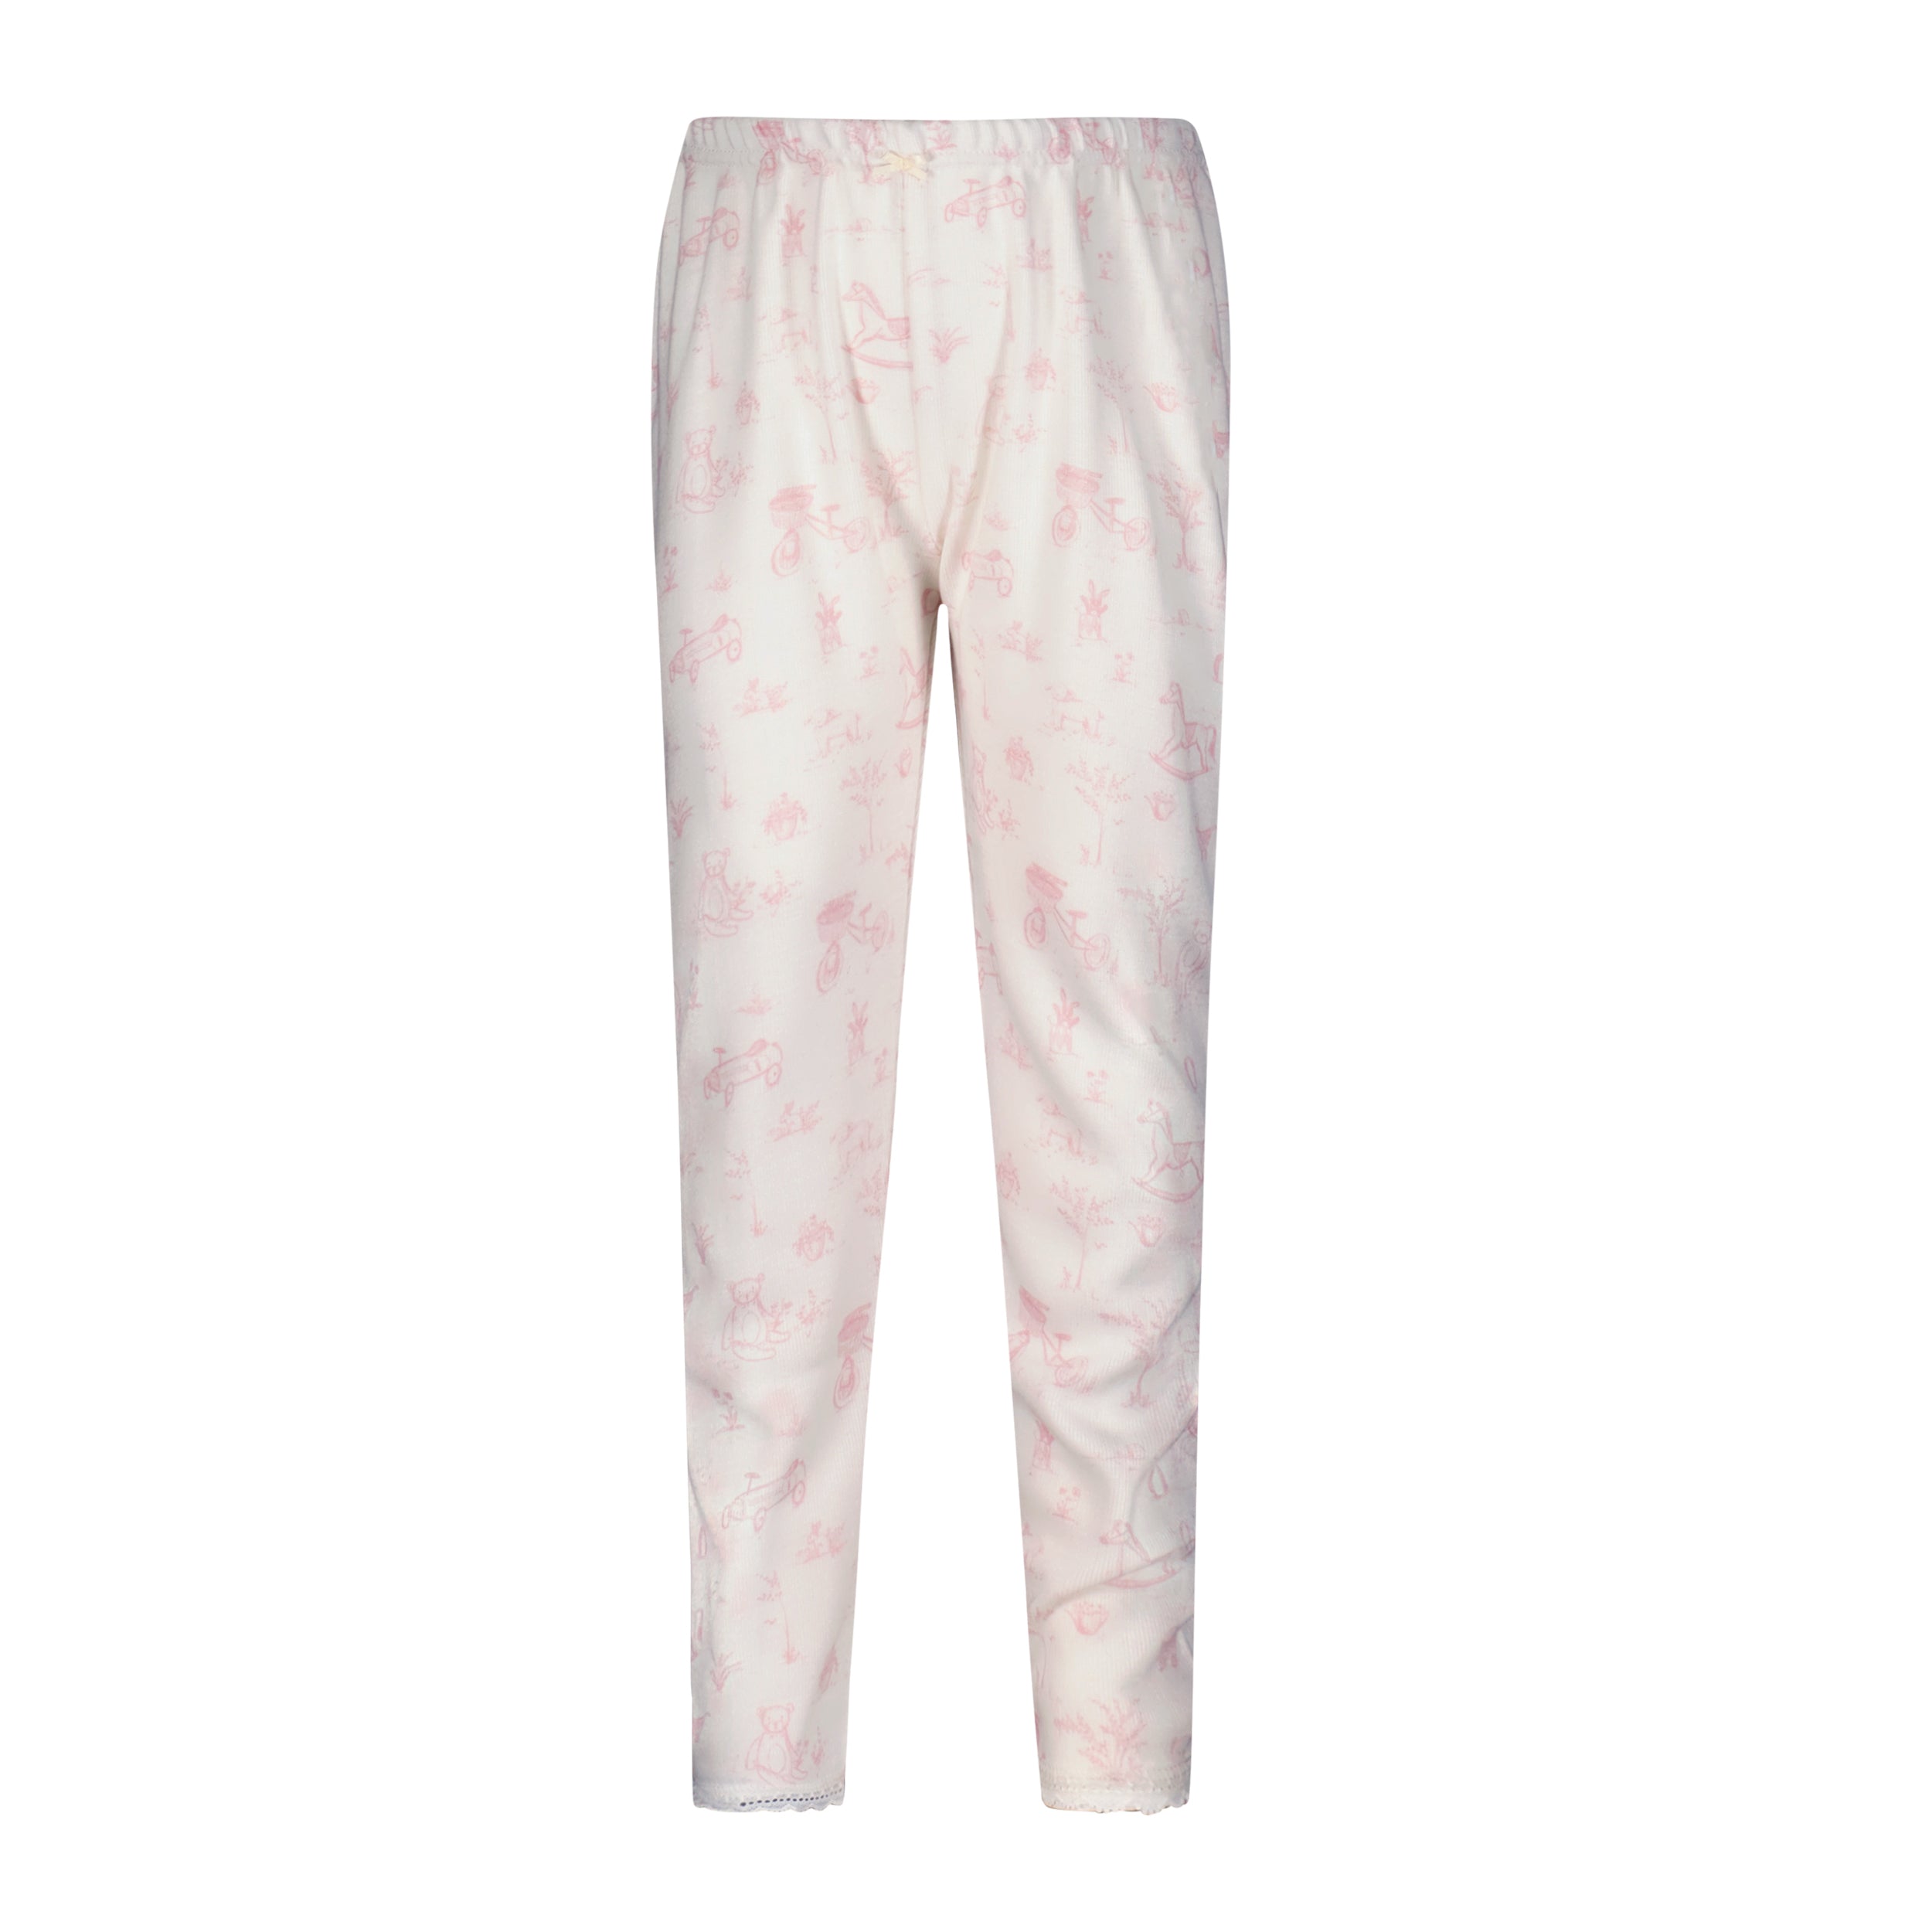 GIRLS PINK TOILE Print PANT w Lace